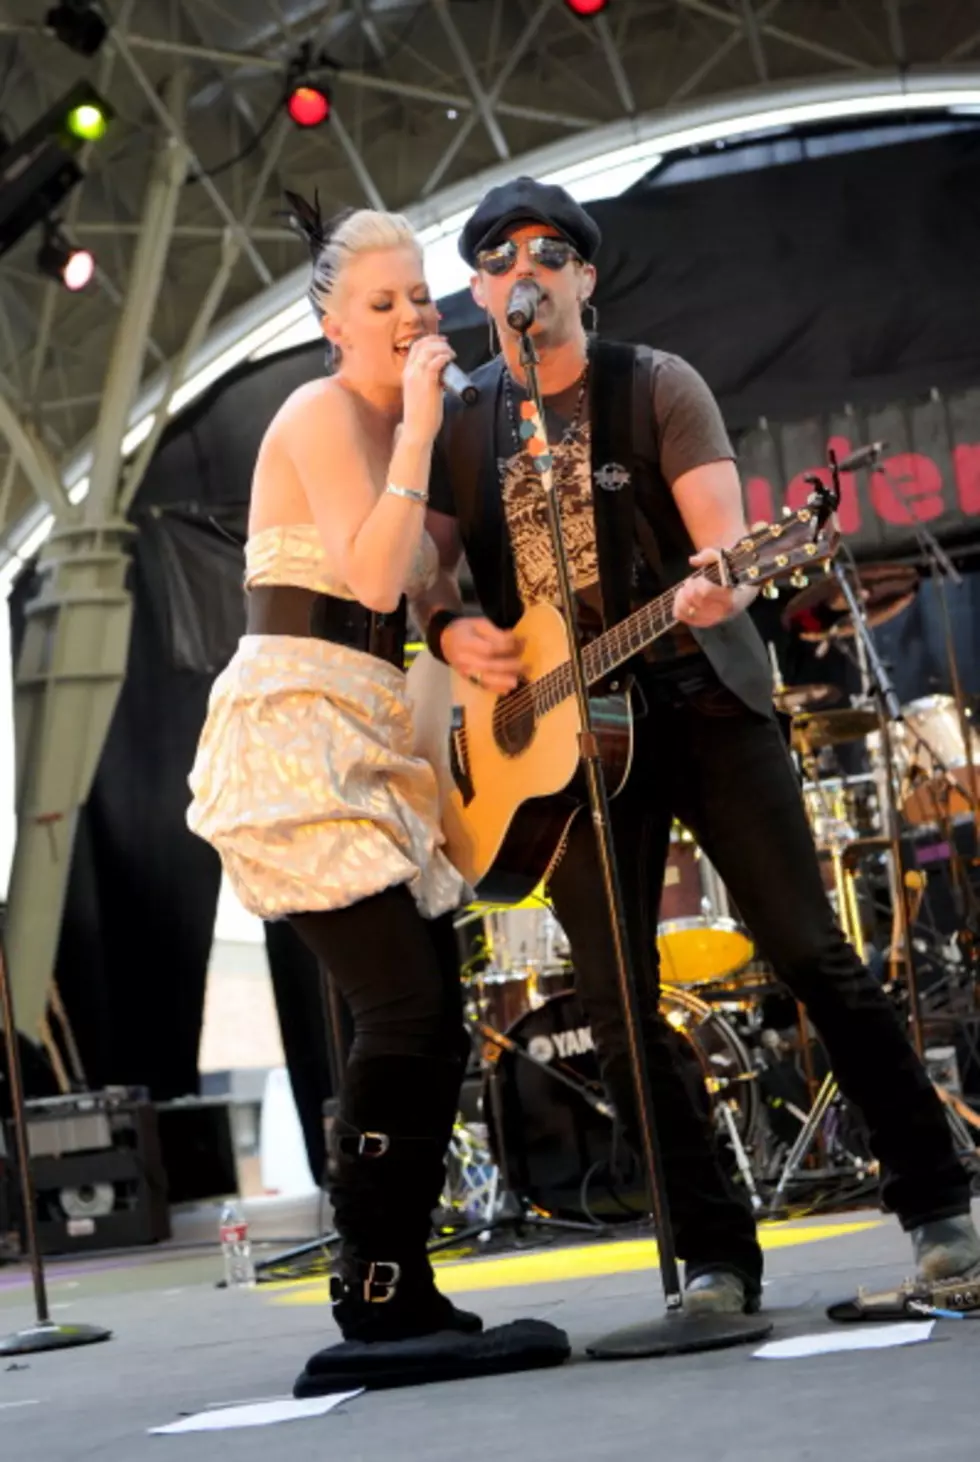 Have you ever seen a pic of Thompson Square?